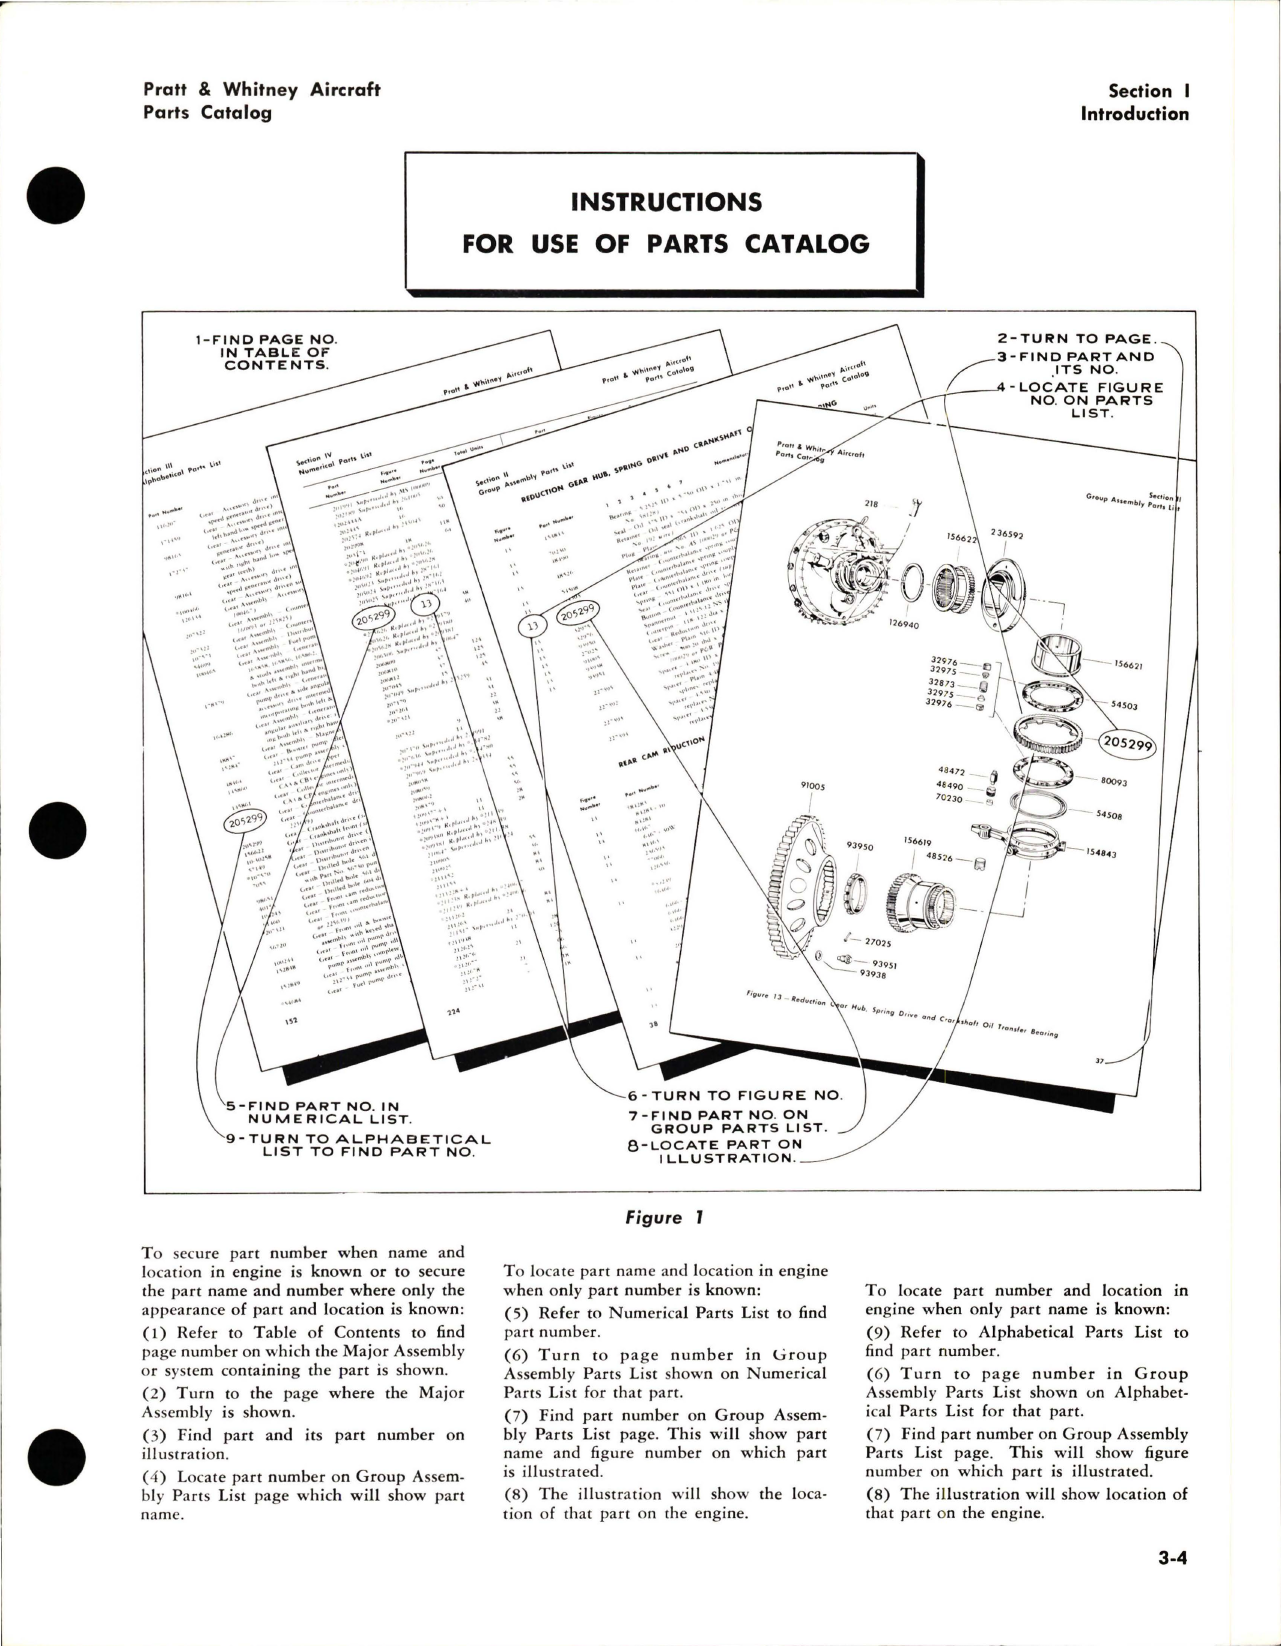 Sample page 7 from AirCorps Library document: Parts Catalog Revision for Double Wasp - CA3, CA15, CA18, CB3, CB16 & CB17 Engines